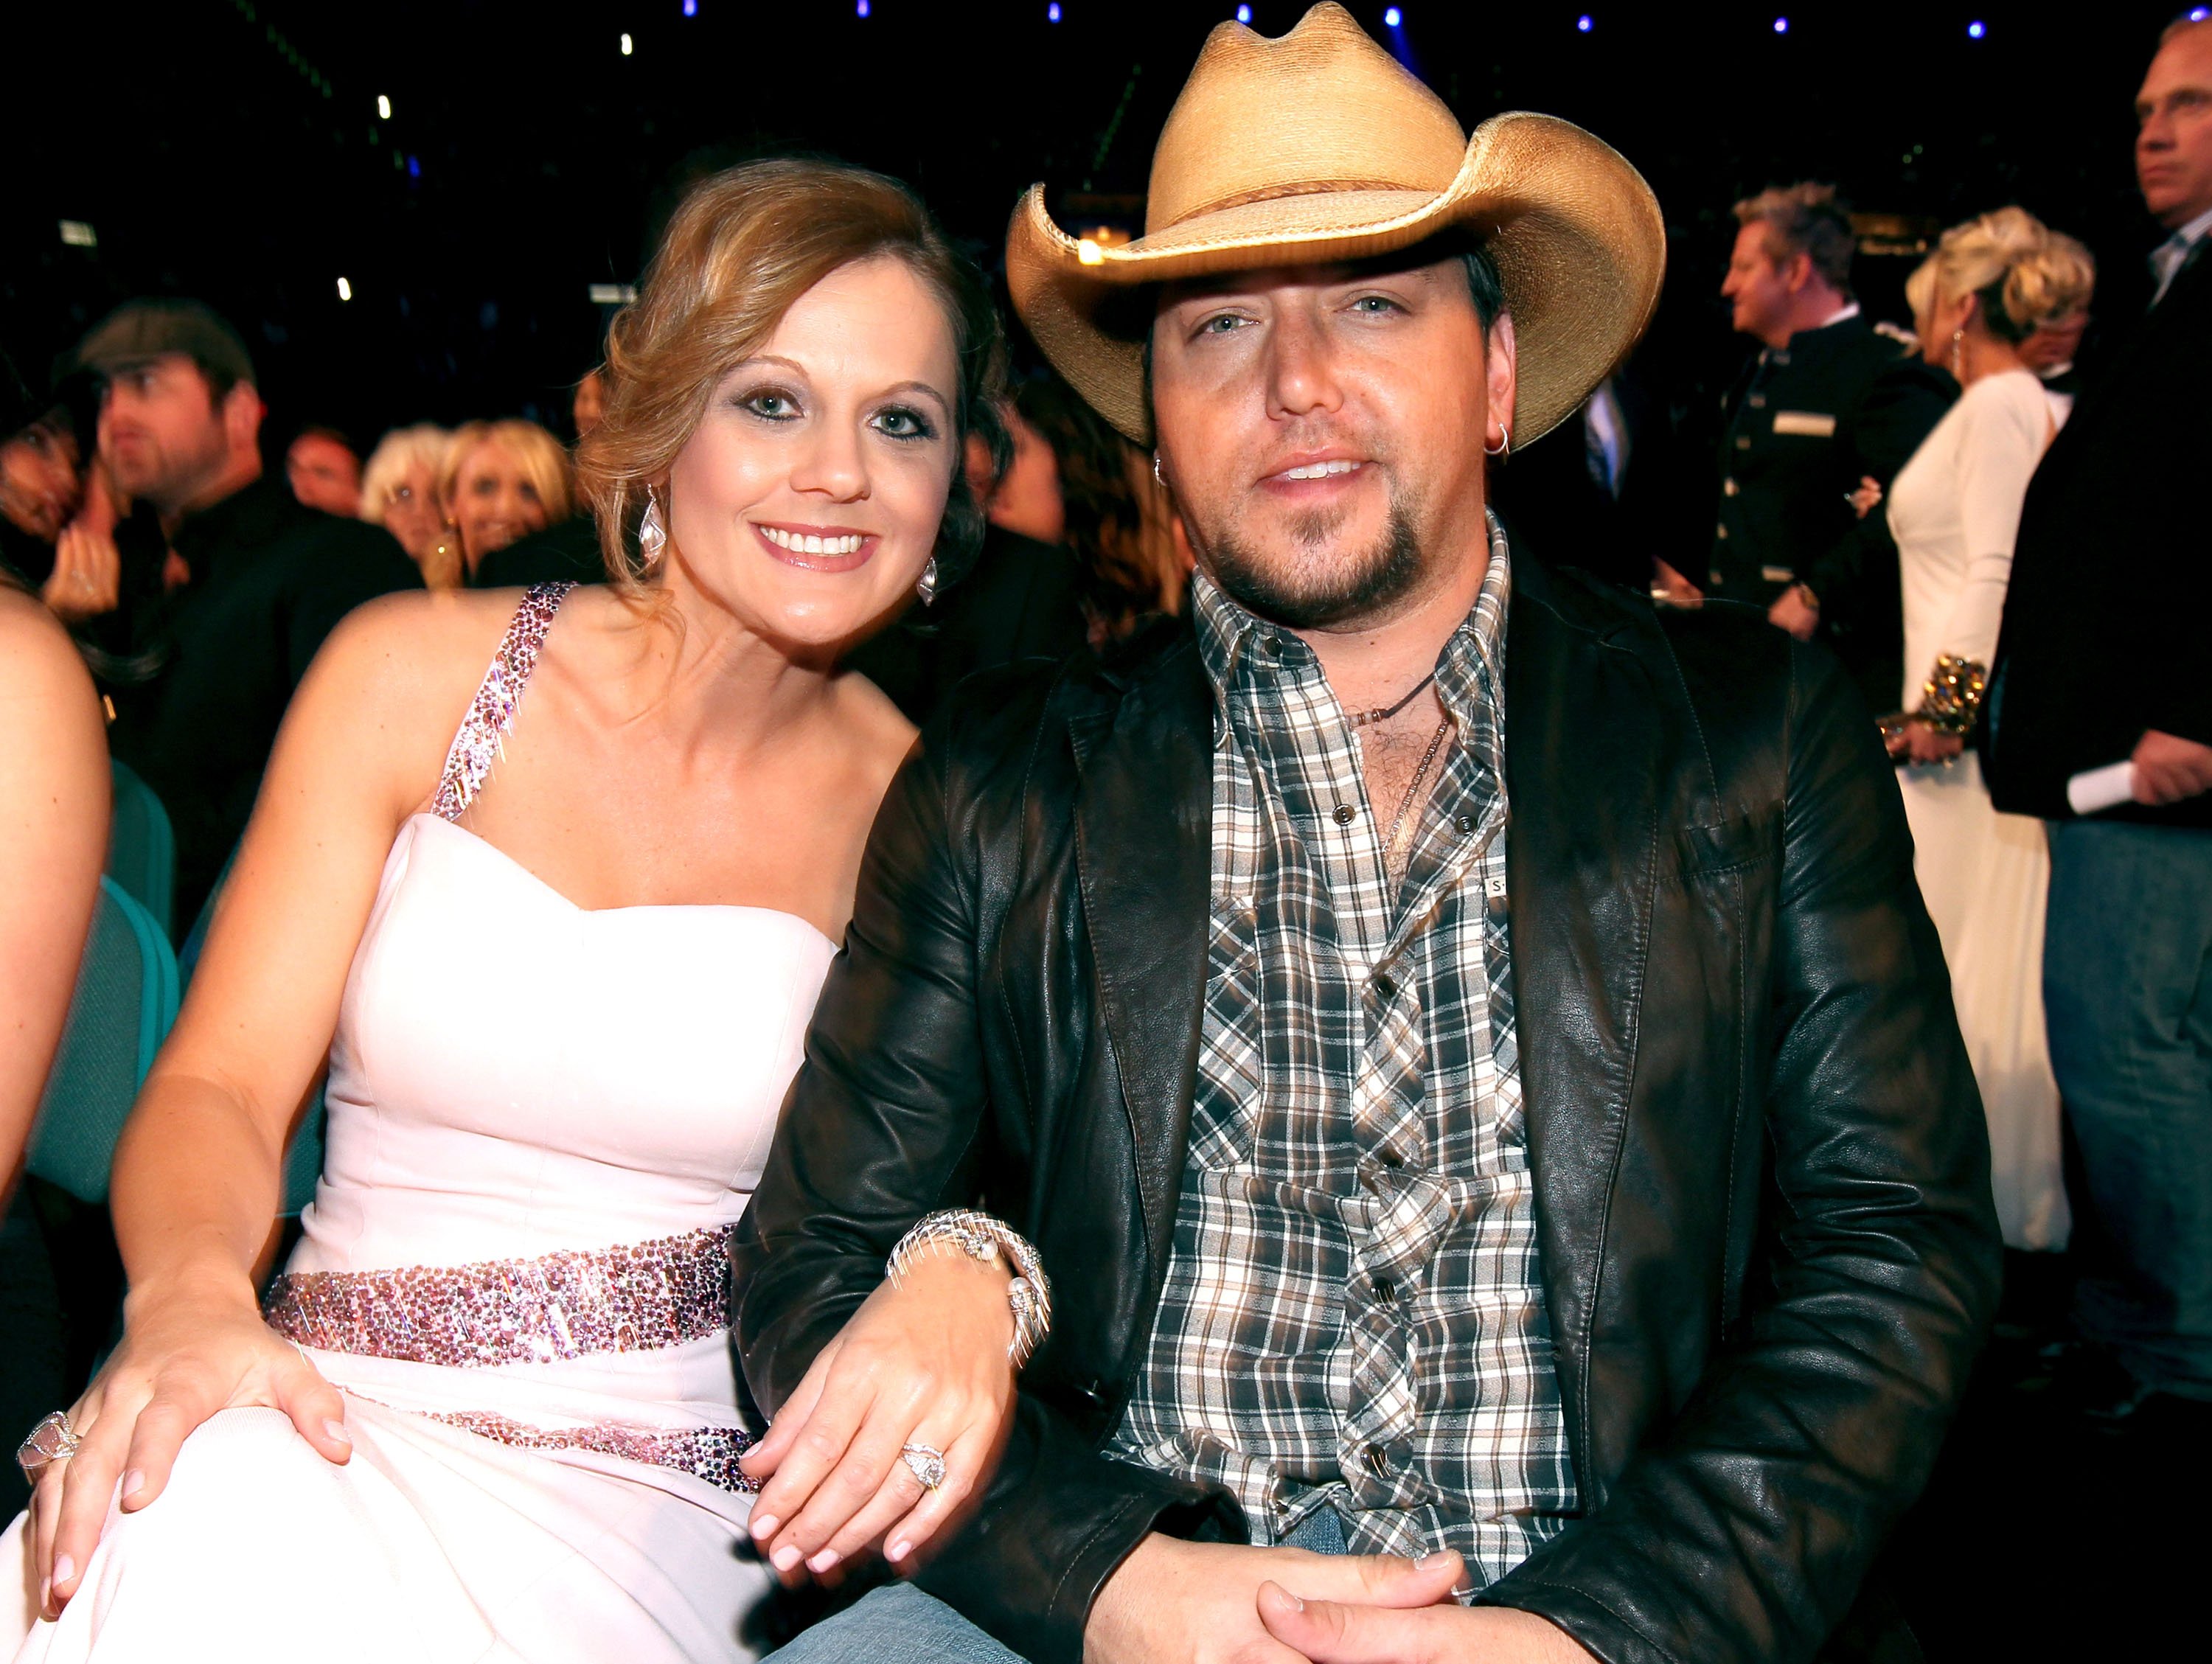 Jessica Aldean and Jason Aldean attend the 47th Annual Academy Of Country Music Awards held at the MGM Grand Garden Arena on April 1, 2012 in Las Vegas, Nevada | Source: Getty Images